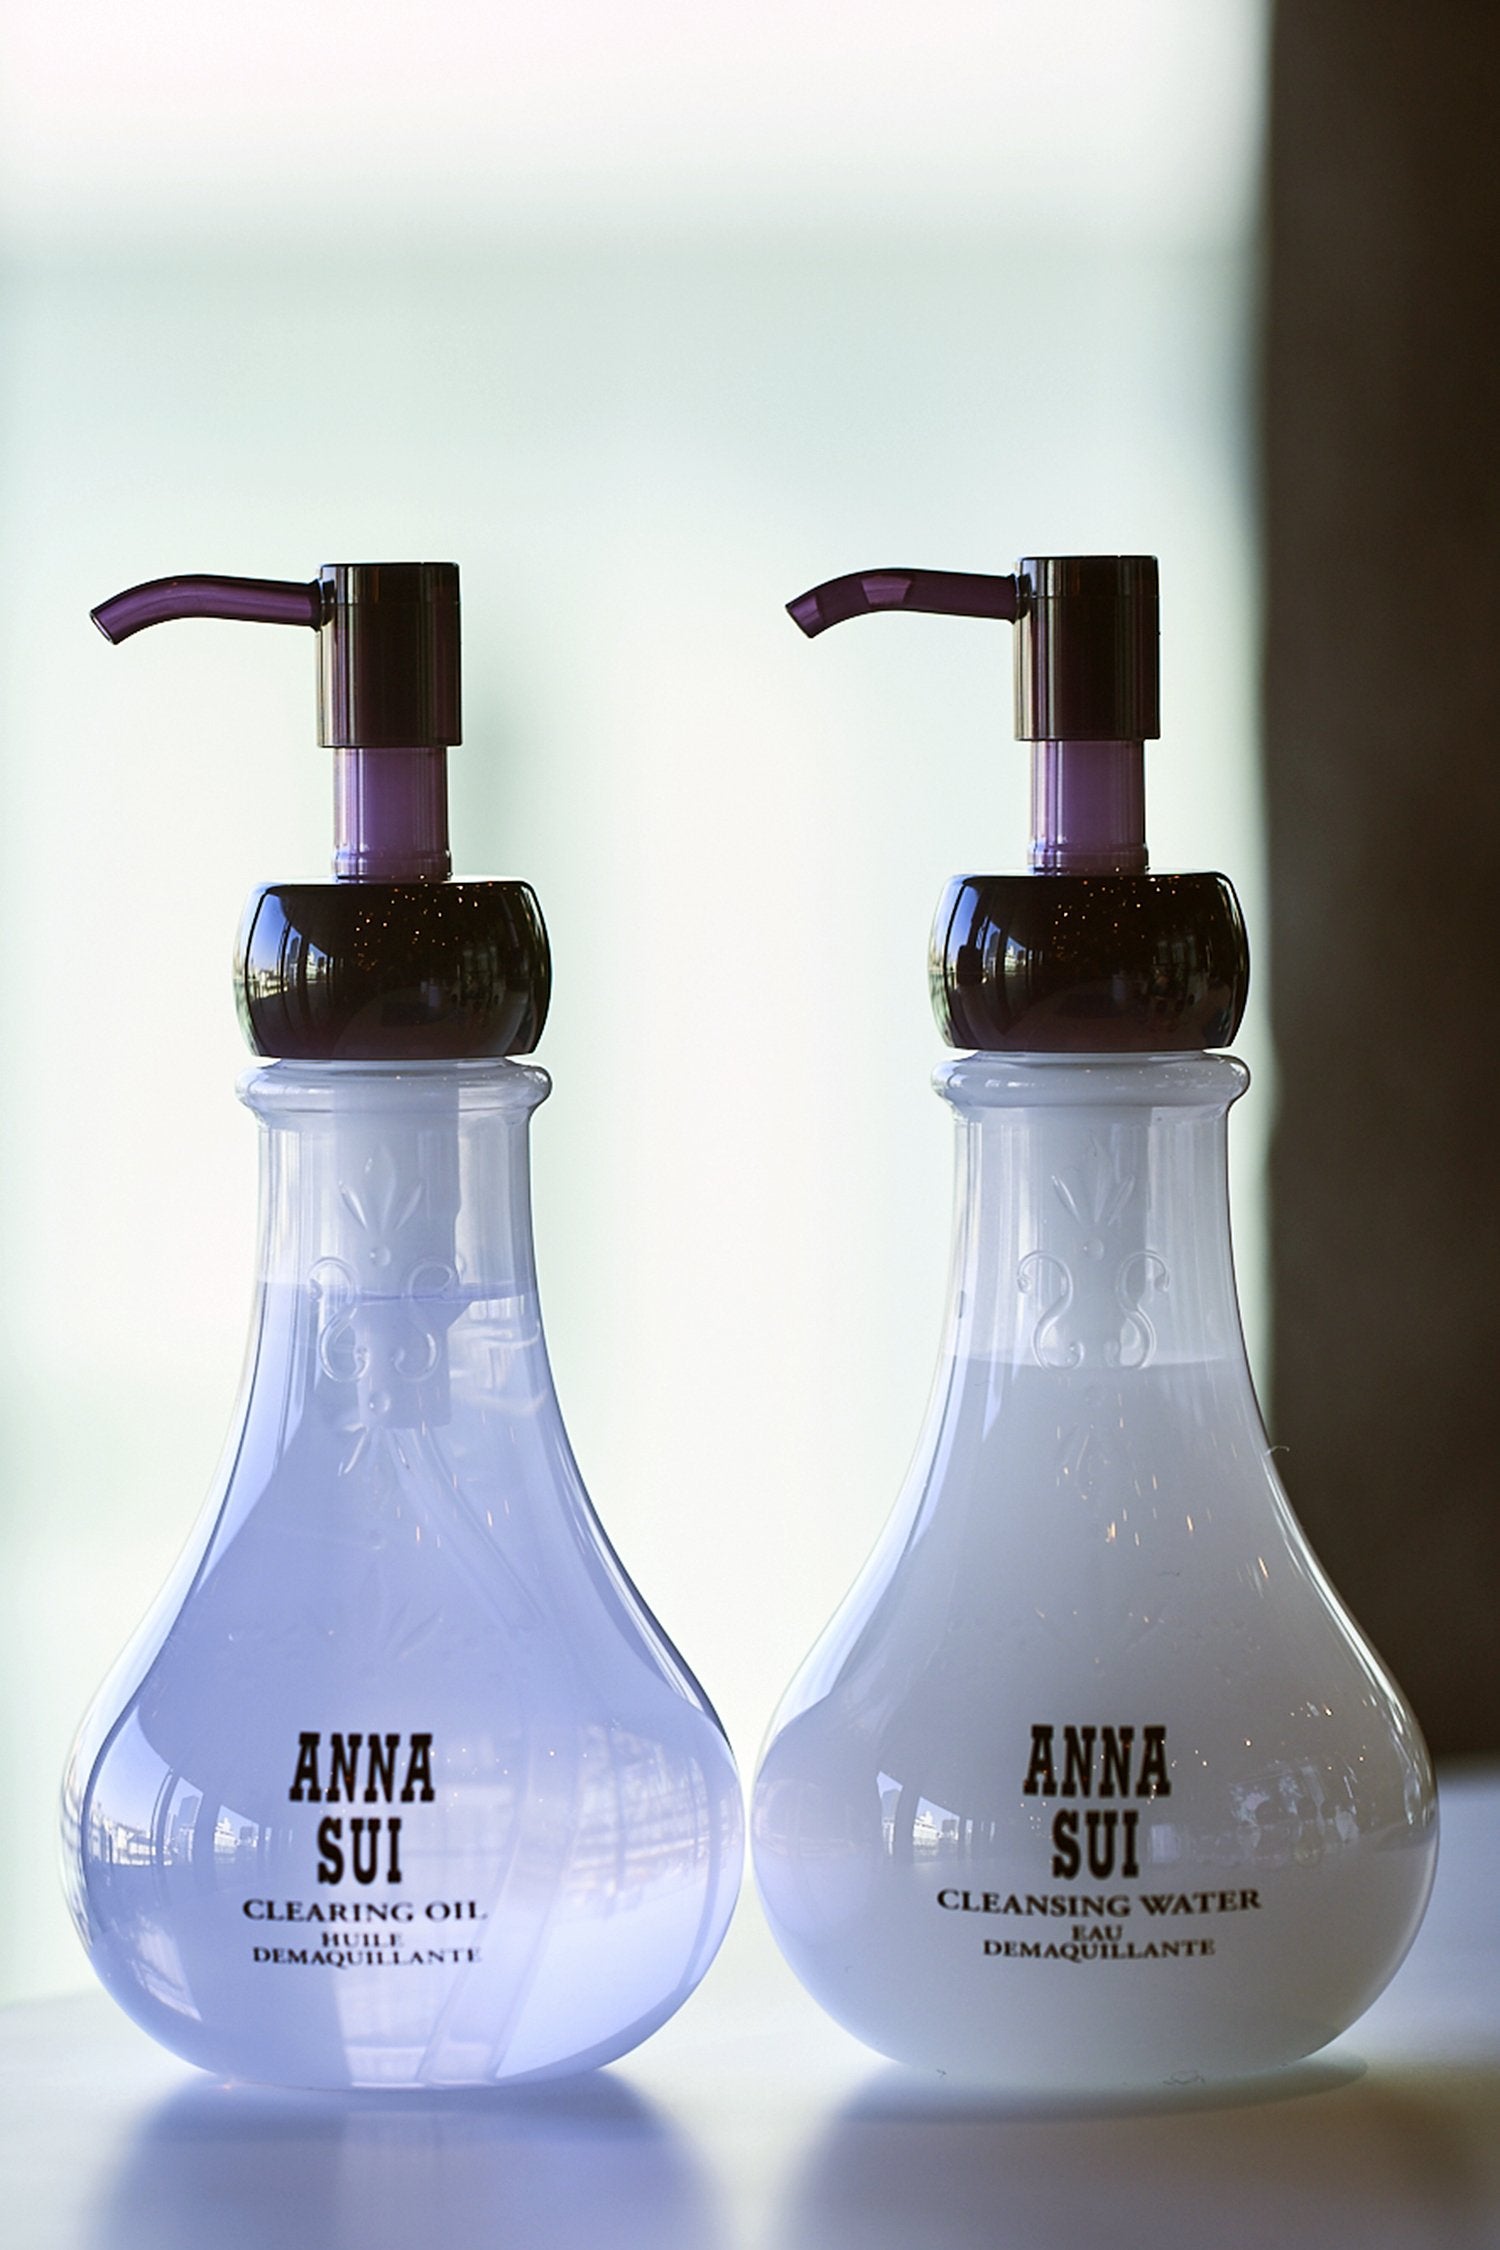 2-bulb-shaped container, floral design & Anna branding, the dispenser is dark purple, 1 water, 1 oil.